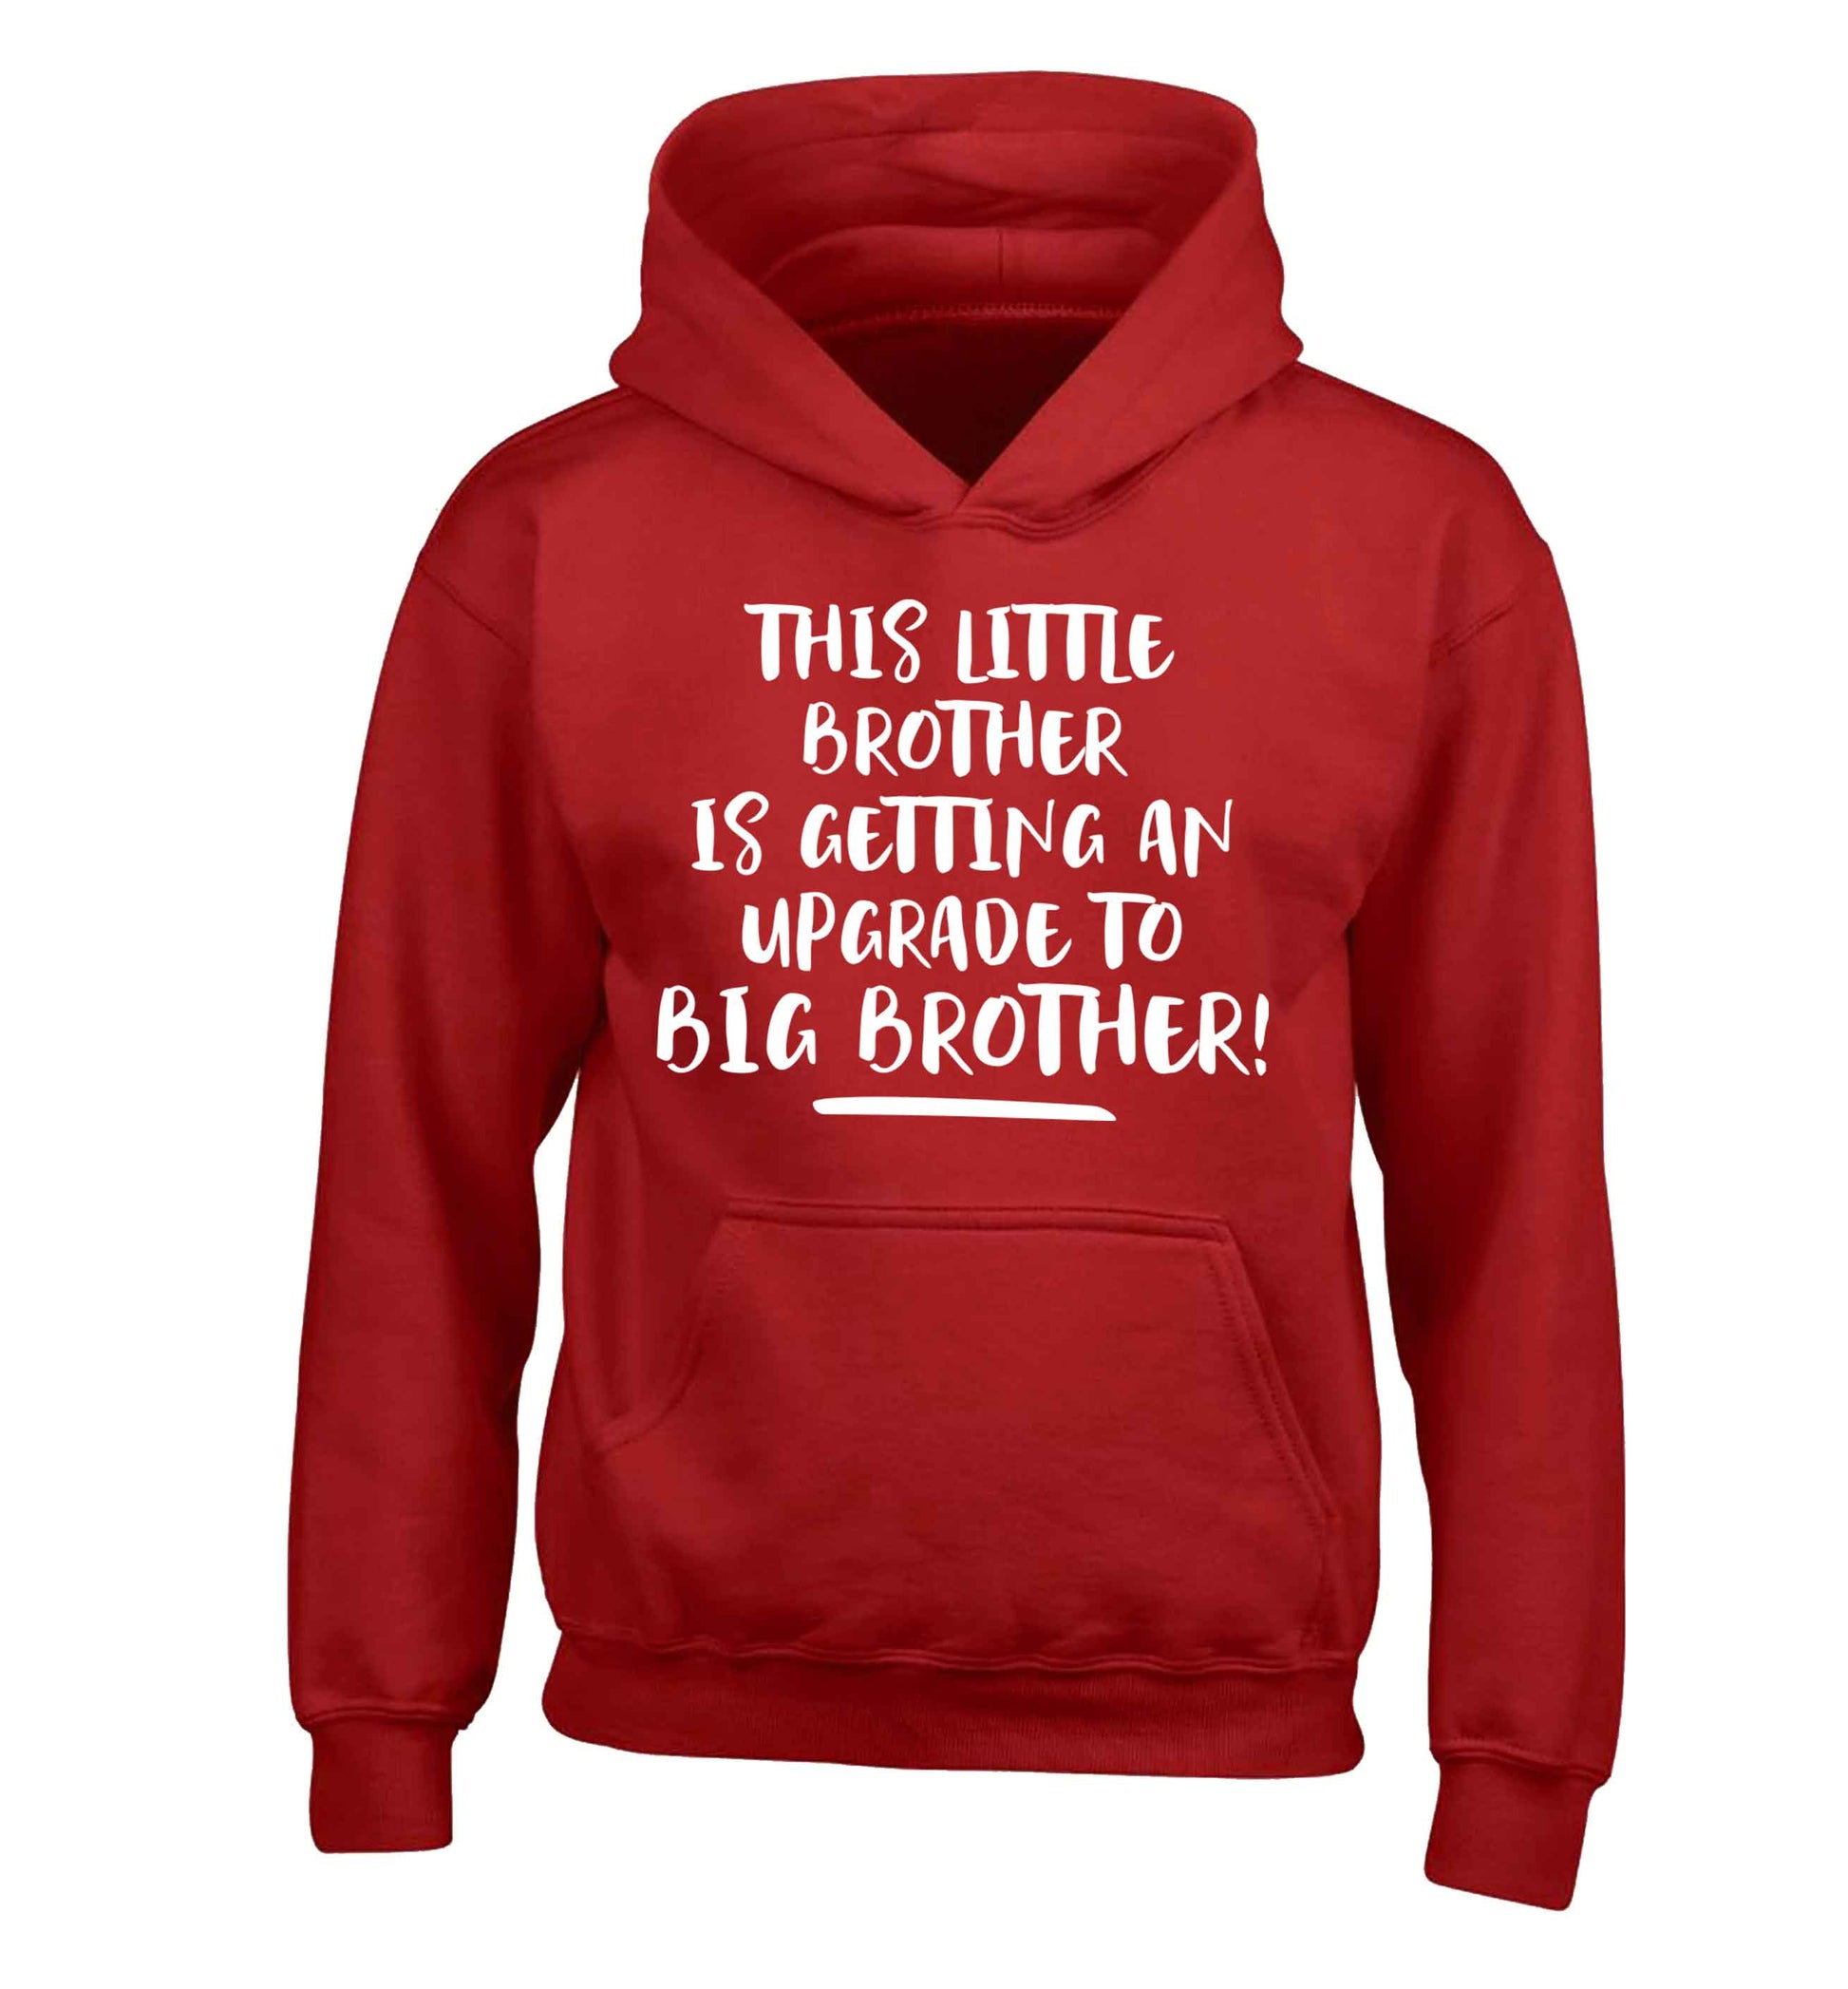 This little brother is getting an upgrade to big brother! children's red hoodie 12-13 Years